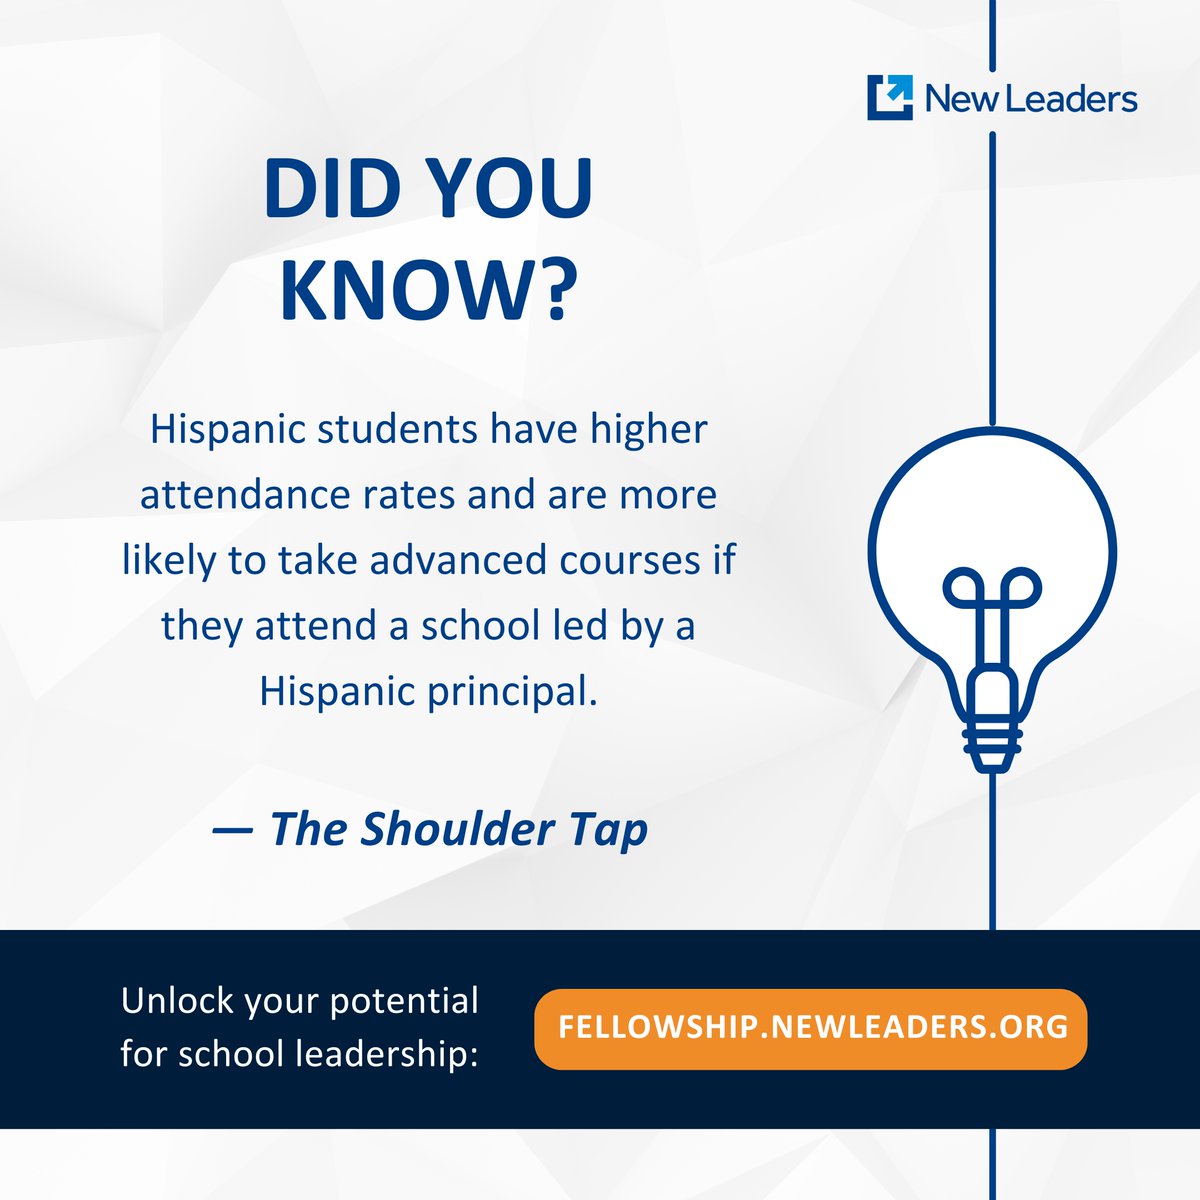 Students thrive when leaders mirror their diversity. Despite Hispanics being 30% of K-12 students, only 10% of leaders are Hispanic. Our Fellowship empowers aspiring leaders to be effective, culturally-responsive #principals. Ready to lead? Apply now: hubs.ly/Q02sRWJg0